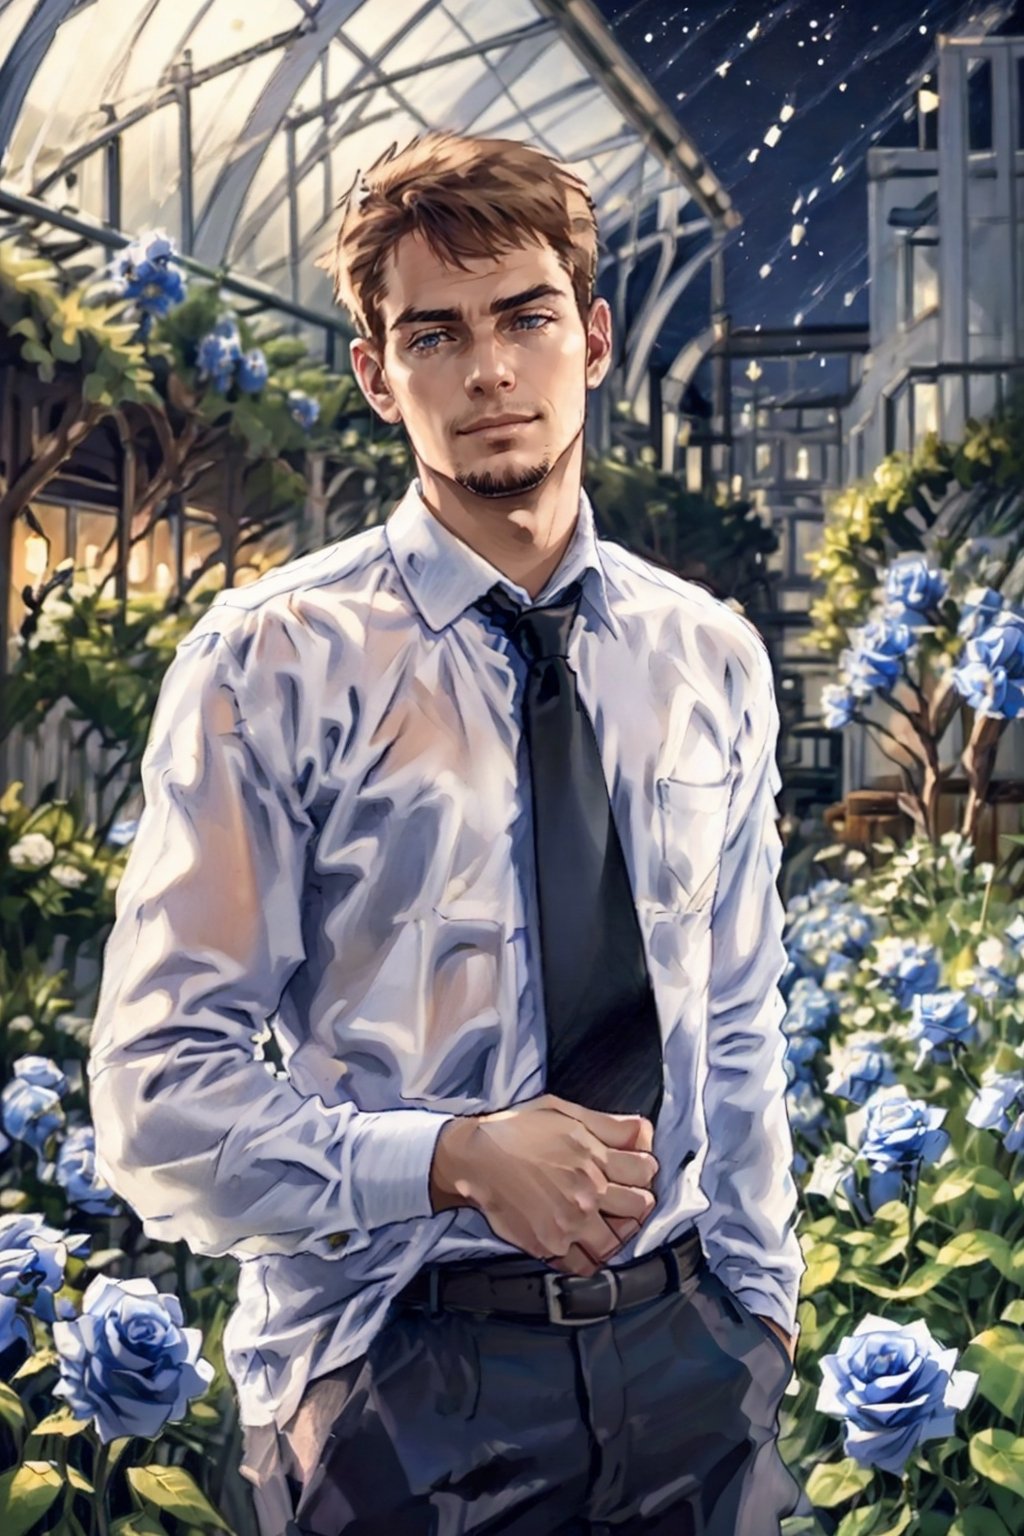 (1 image only), solo male,Kyle Hyde, detective, depict an image of a man who looks like "Kyle Hyde" waiting for a secret romantic date on a roof garden of blue roses during nighttime, standing under a rose arch, a lot of blue flowers (roses) in the background, city lights in the background, white collared shirt and black necktie, a beautiful blue rose in his shirt's breastpocket, mature, manly, masculine,  confidence, charming, alluring, romantic, mischievous smile, looking at viewer, perfect anatomy, perfect proportions, 8k, HQ, (best quality:1.5, hyperrealistic:1.5, photorealistic:1.4, madly detailed CG unity 8k wallpaper:1.5, masterpiece:1.3, madly detailed photo:1.2), (hyper-realistic lifelike texture:1.4, realistic eyes:1.2), picture-perfect face, perfect eye pupil, detailed eyes, perfecteyes, mature, 40 years old, outside, nighttime, starry sky in the background, moon shines above, in a garden of blue roses, roof garden, kyle_hyde,Glass flower room